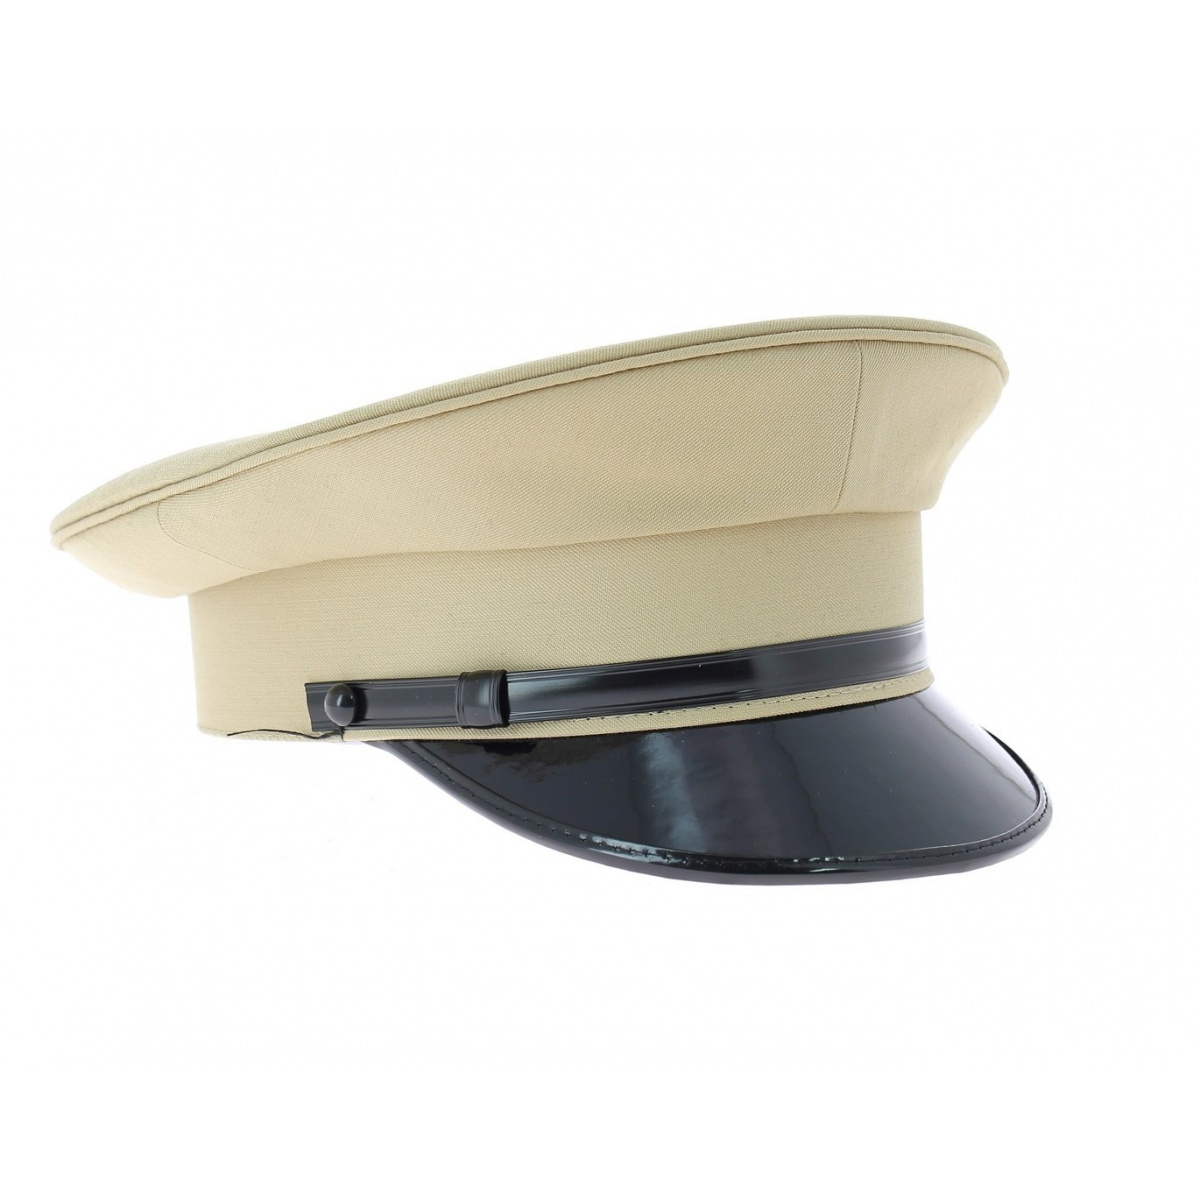 Driver cap 4381 - Chapellerie | Traclet : beige Reference